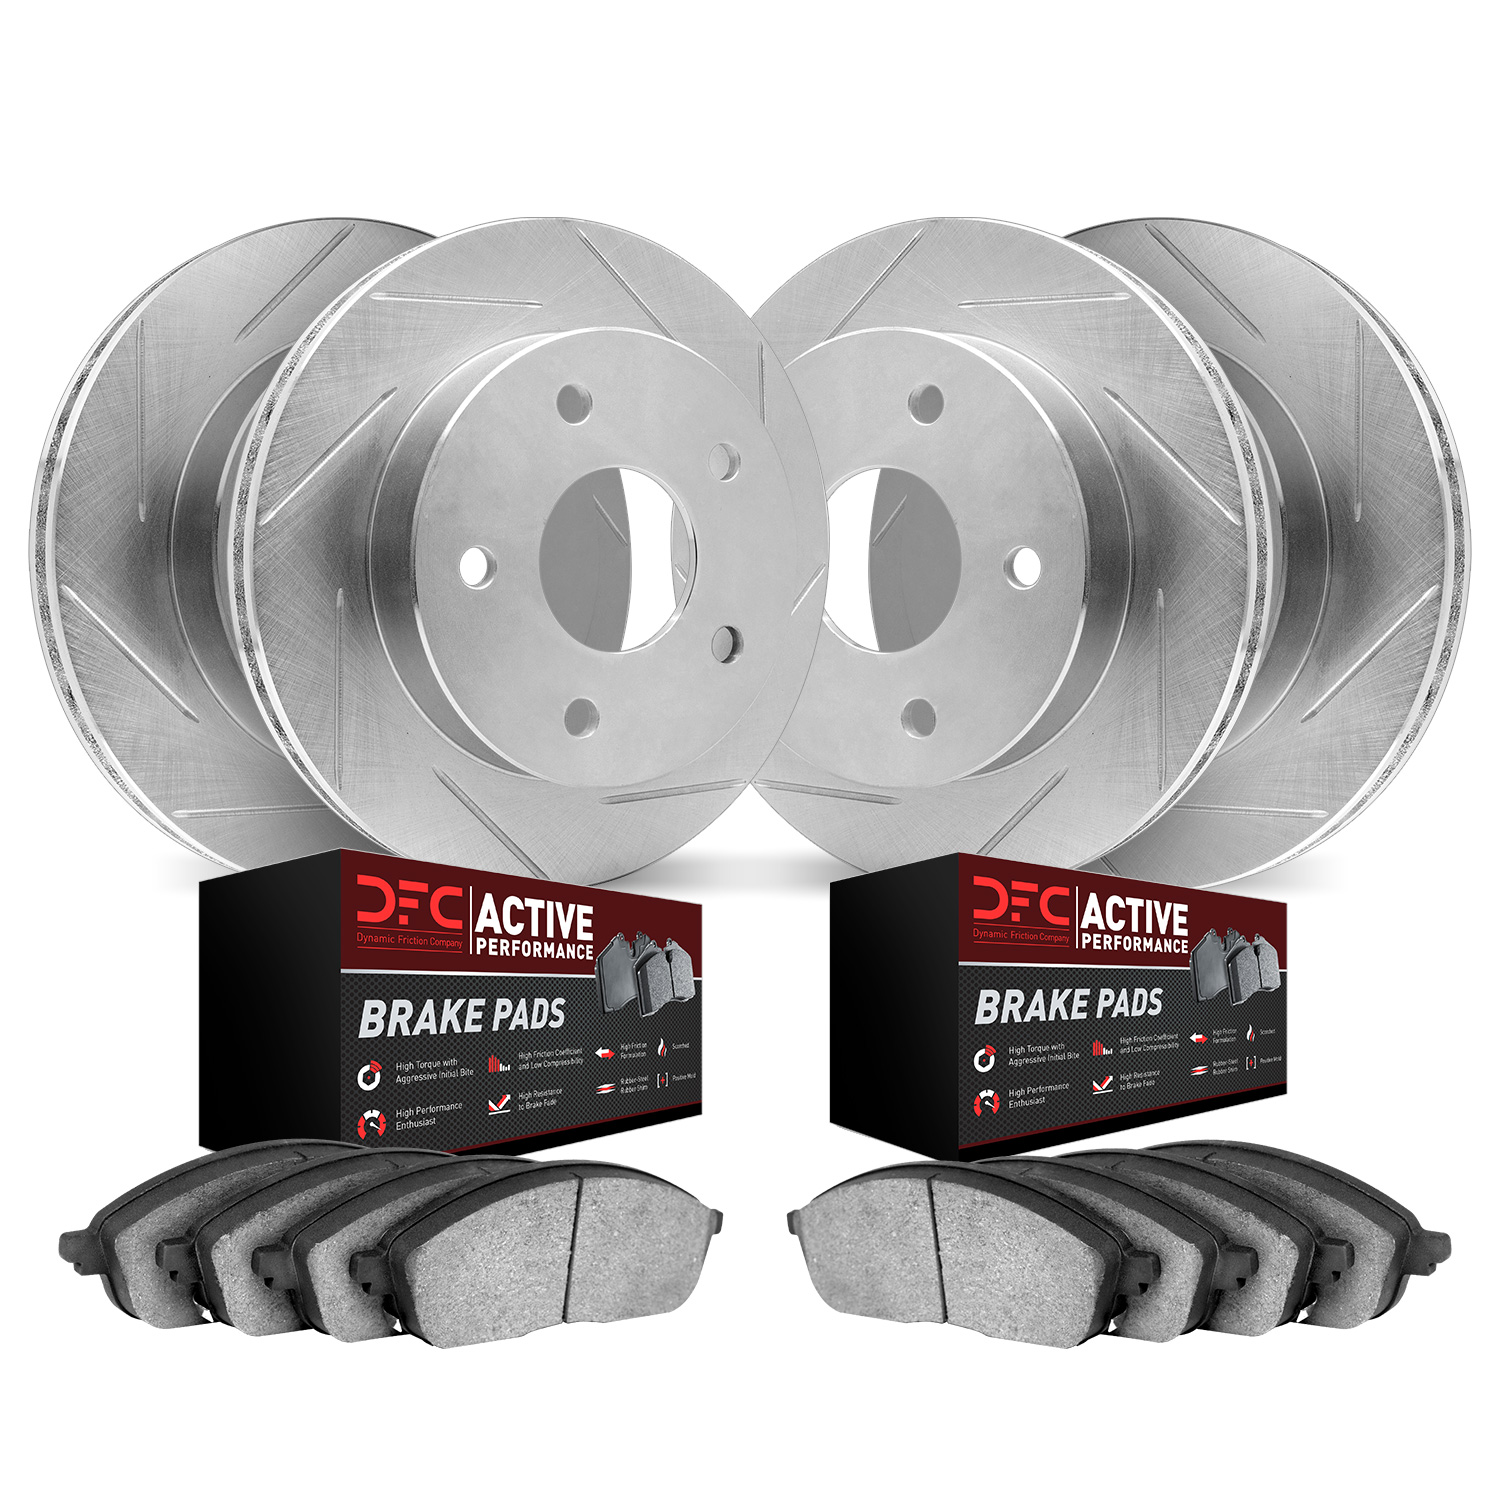 2704-46000 Geoperformance Slotted Brake Rotors with Active Performance Pads Kits, 1997-2009 GM, Position: Front and Rear